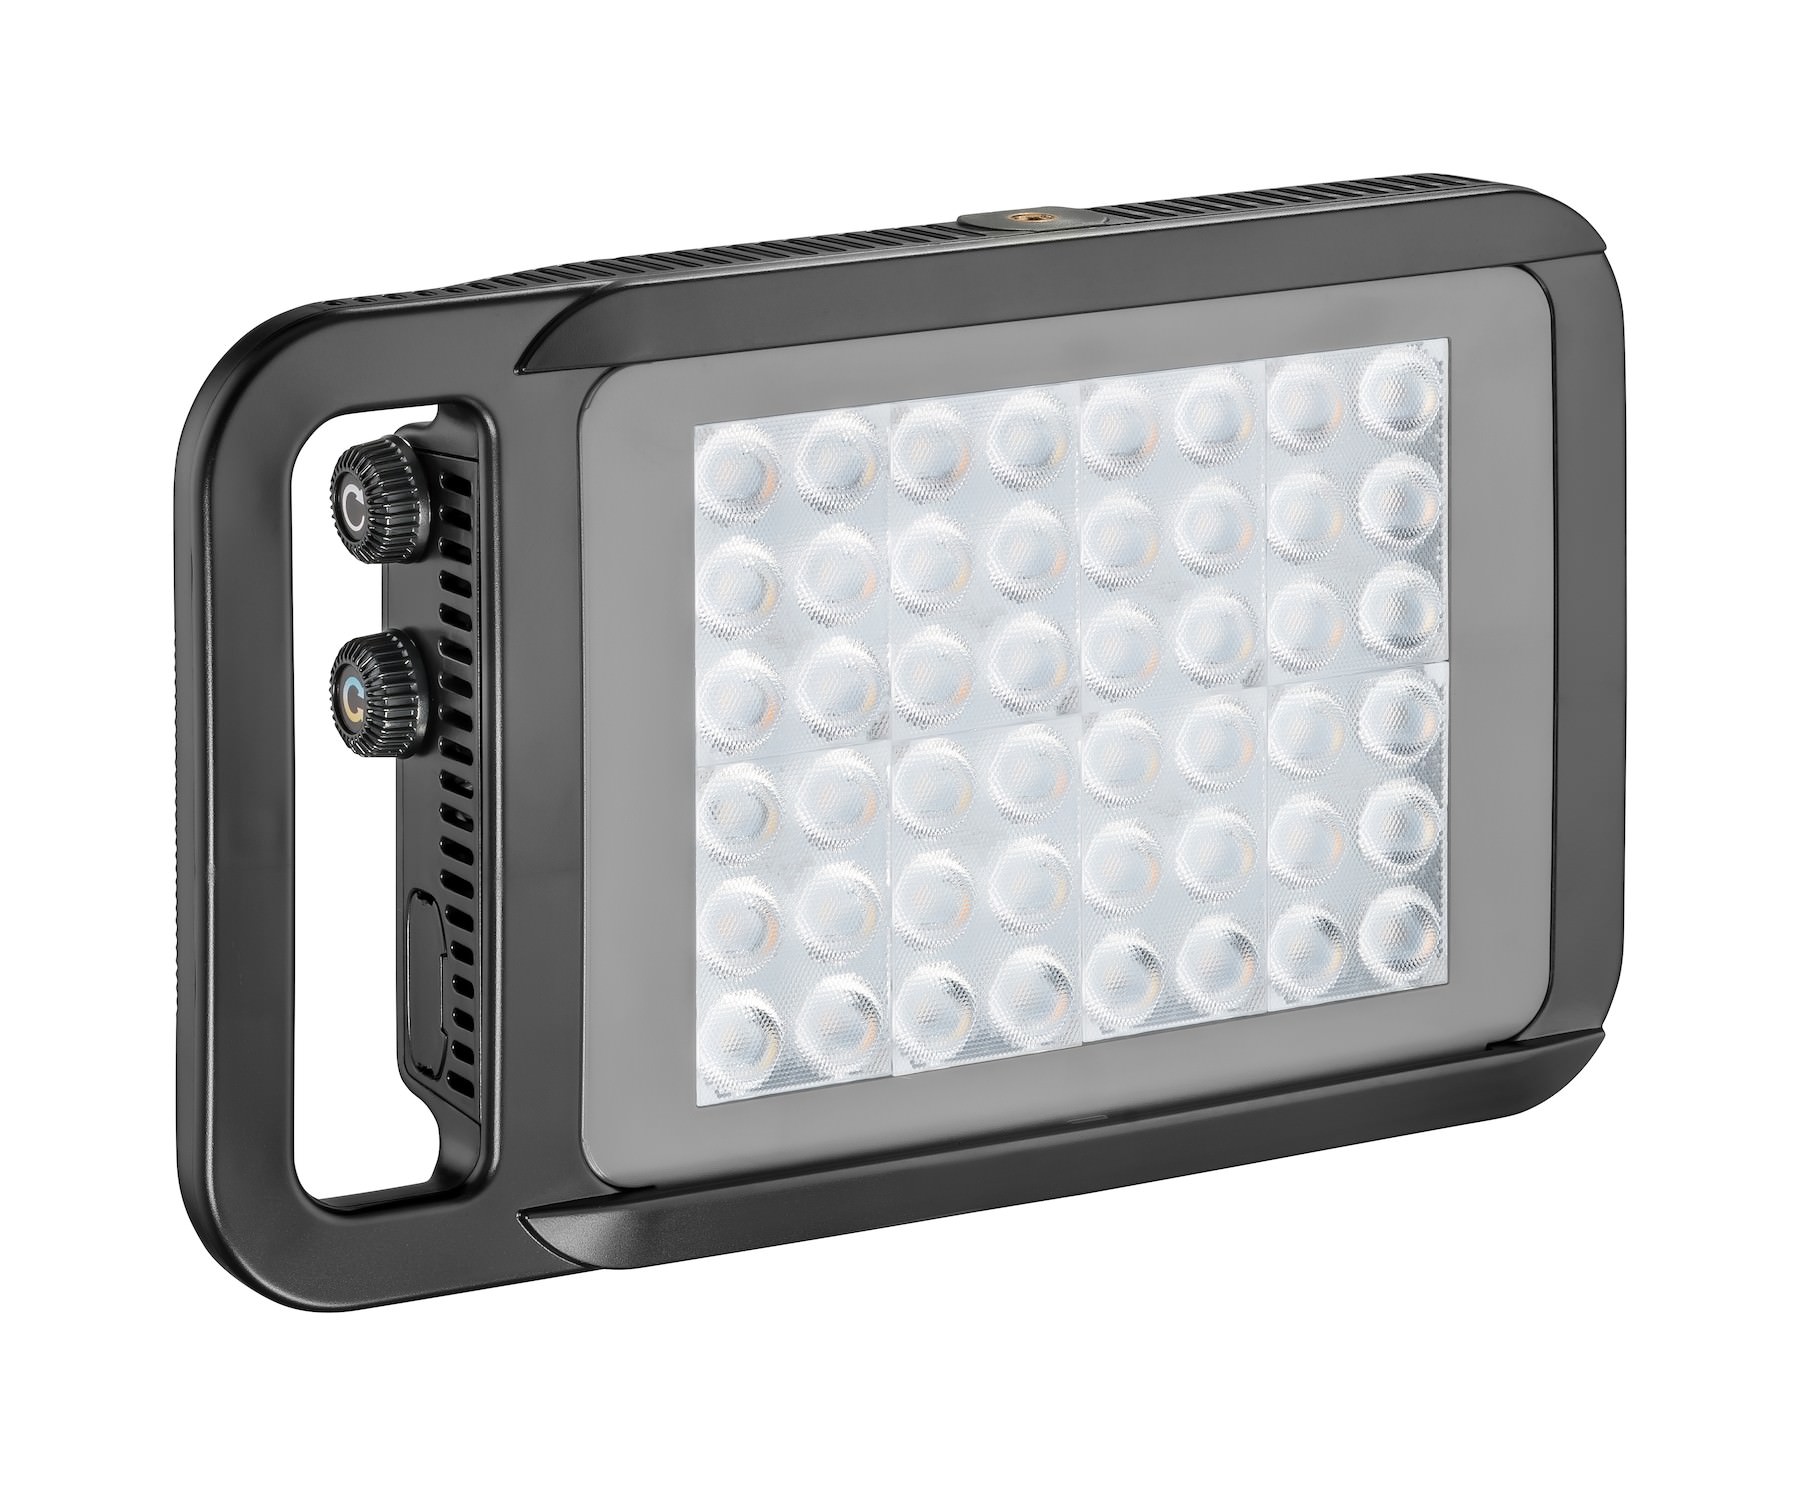 LED Light LYKOS Bicolour, Surface Mounted with Dimmer